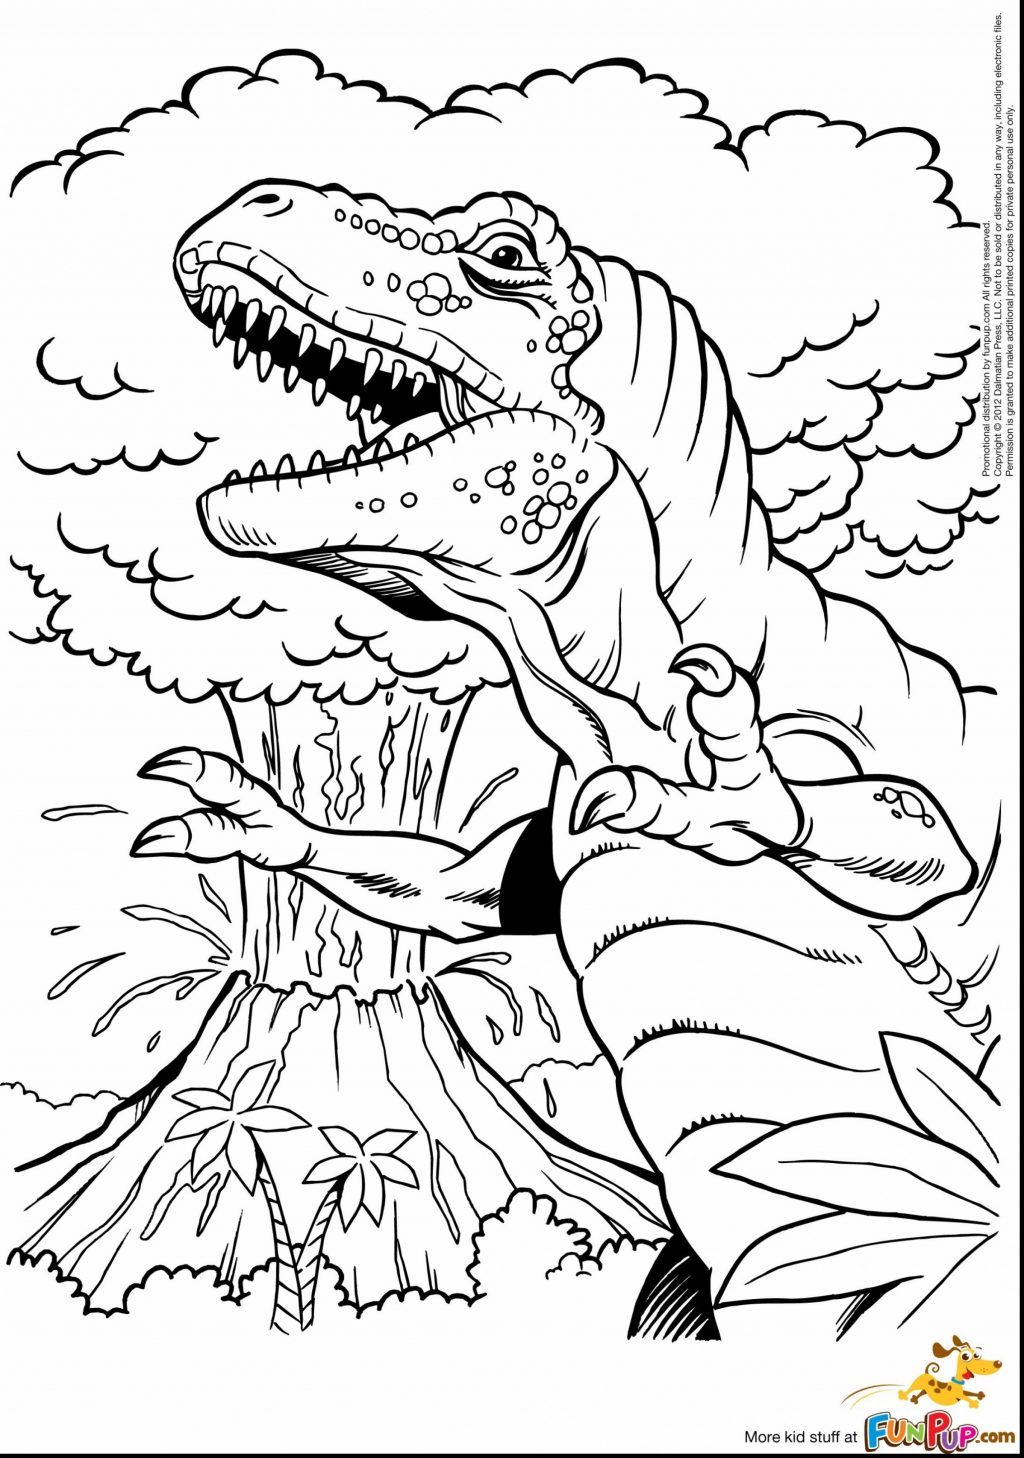 Coloring Pages  Coloring Page Dinosaur Sheets Amazing Image ...